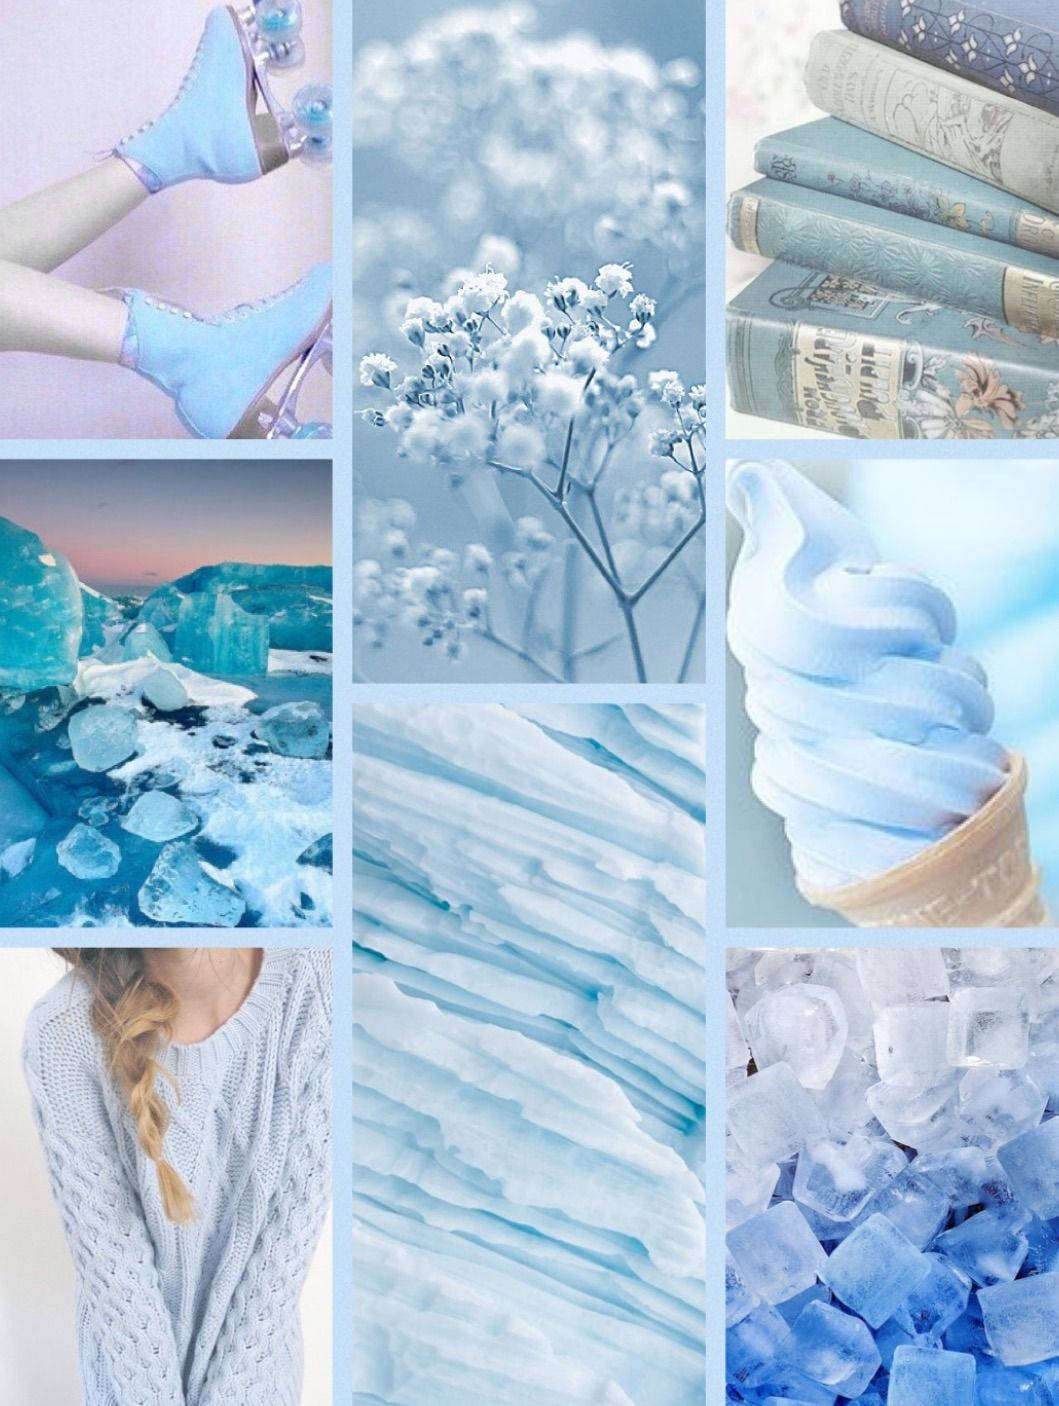 Exquisite Periwinkle Blue Ice On A Cold Day Background